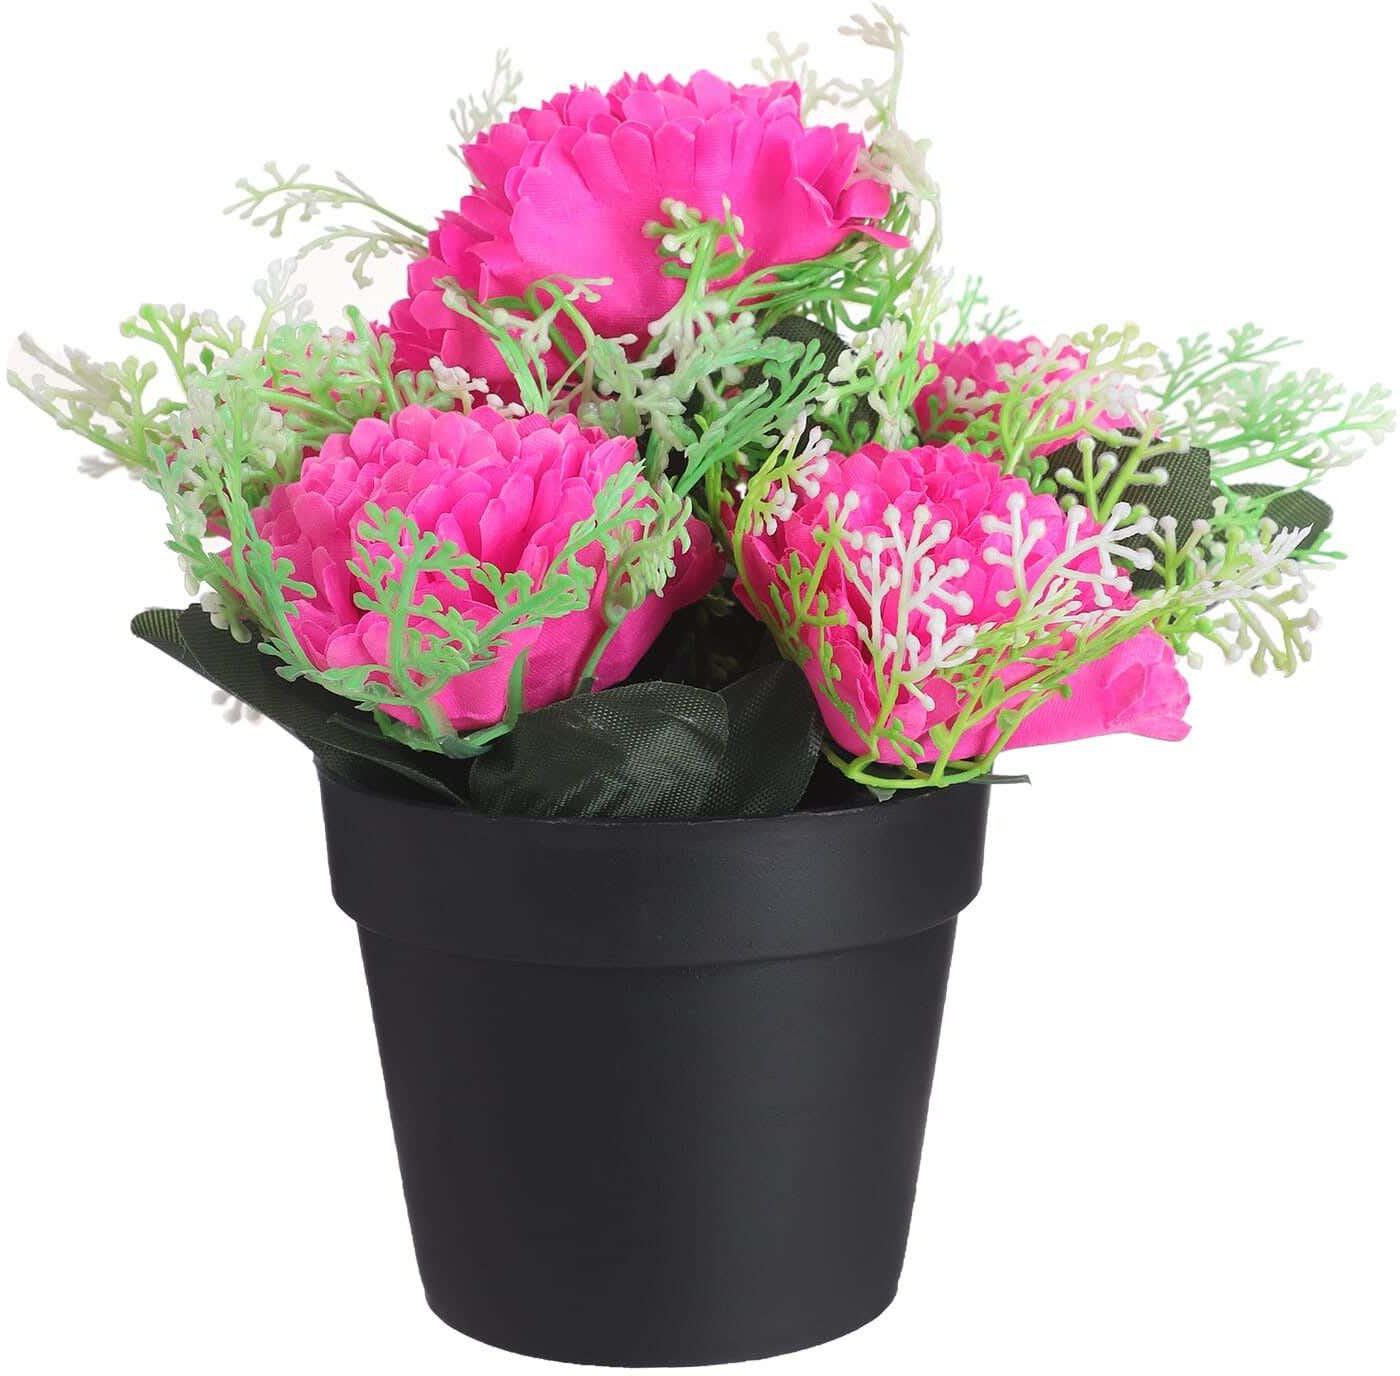 Get Plastic Round Vase With Flowers, 10 Cm - Fuchsia with best offers | Raneen.com